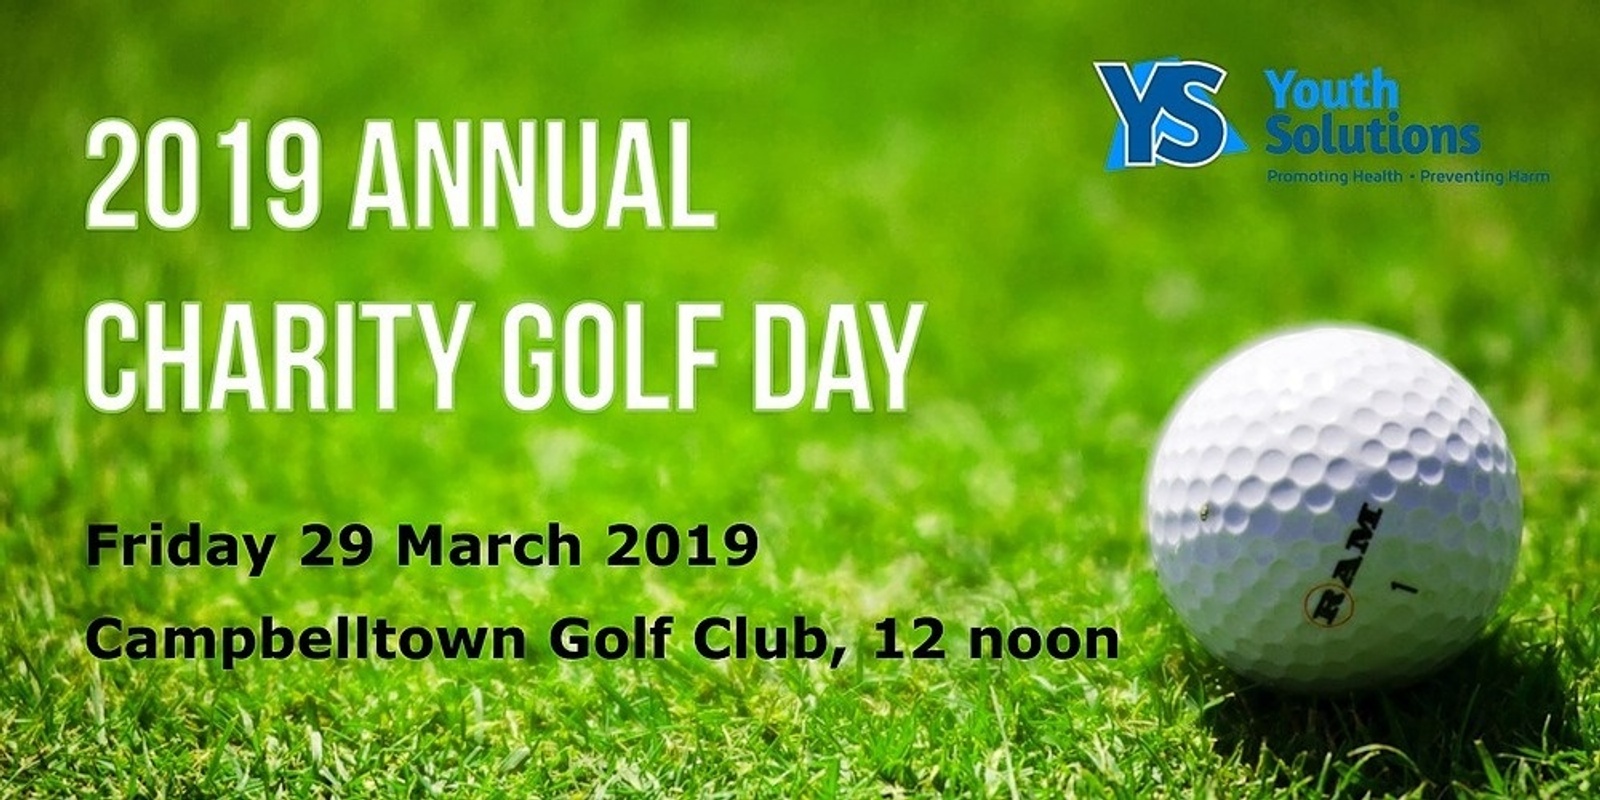 Banner image for Youth Solutions' Annual Charity Golf Day